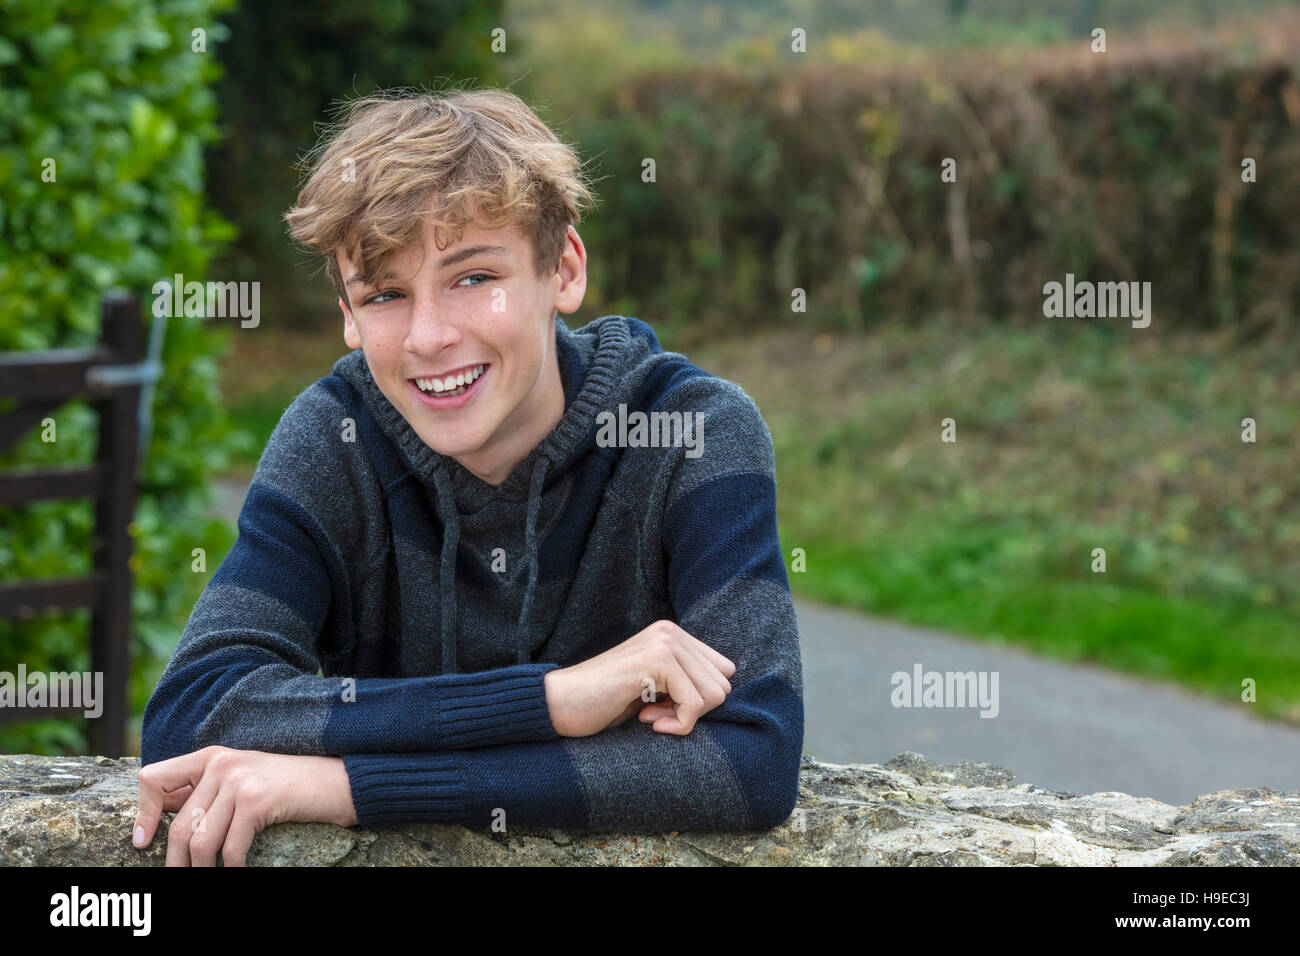 Young happy laughing smiling teenager male boy blond child outside leaning on a wall in autumn fall sunshine Stock Photo